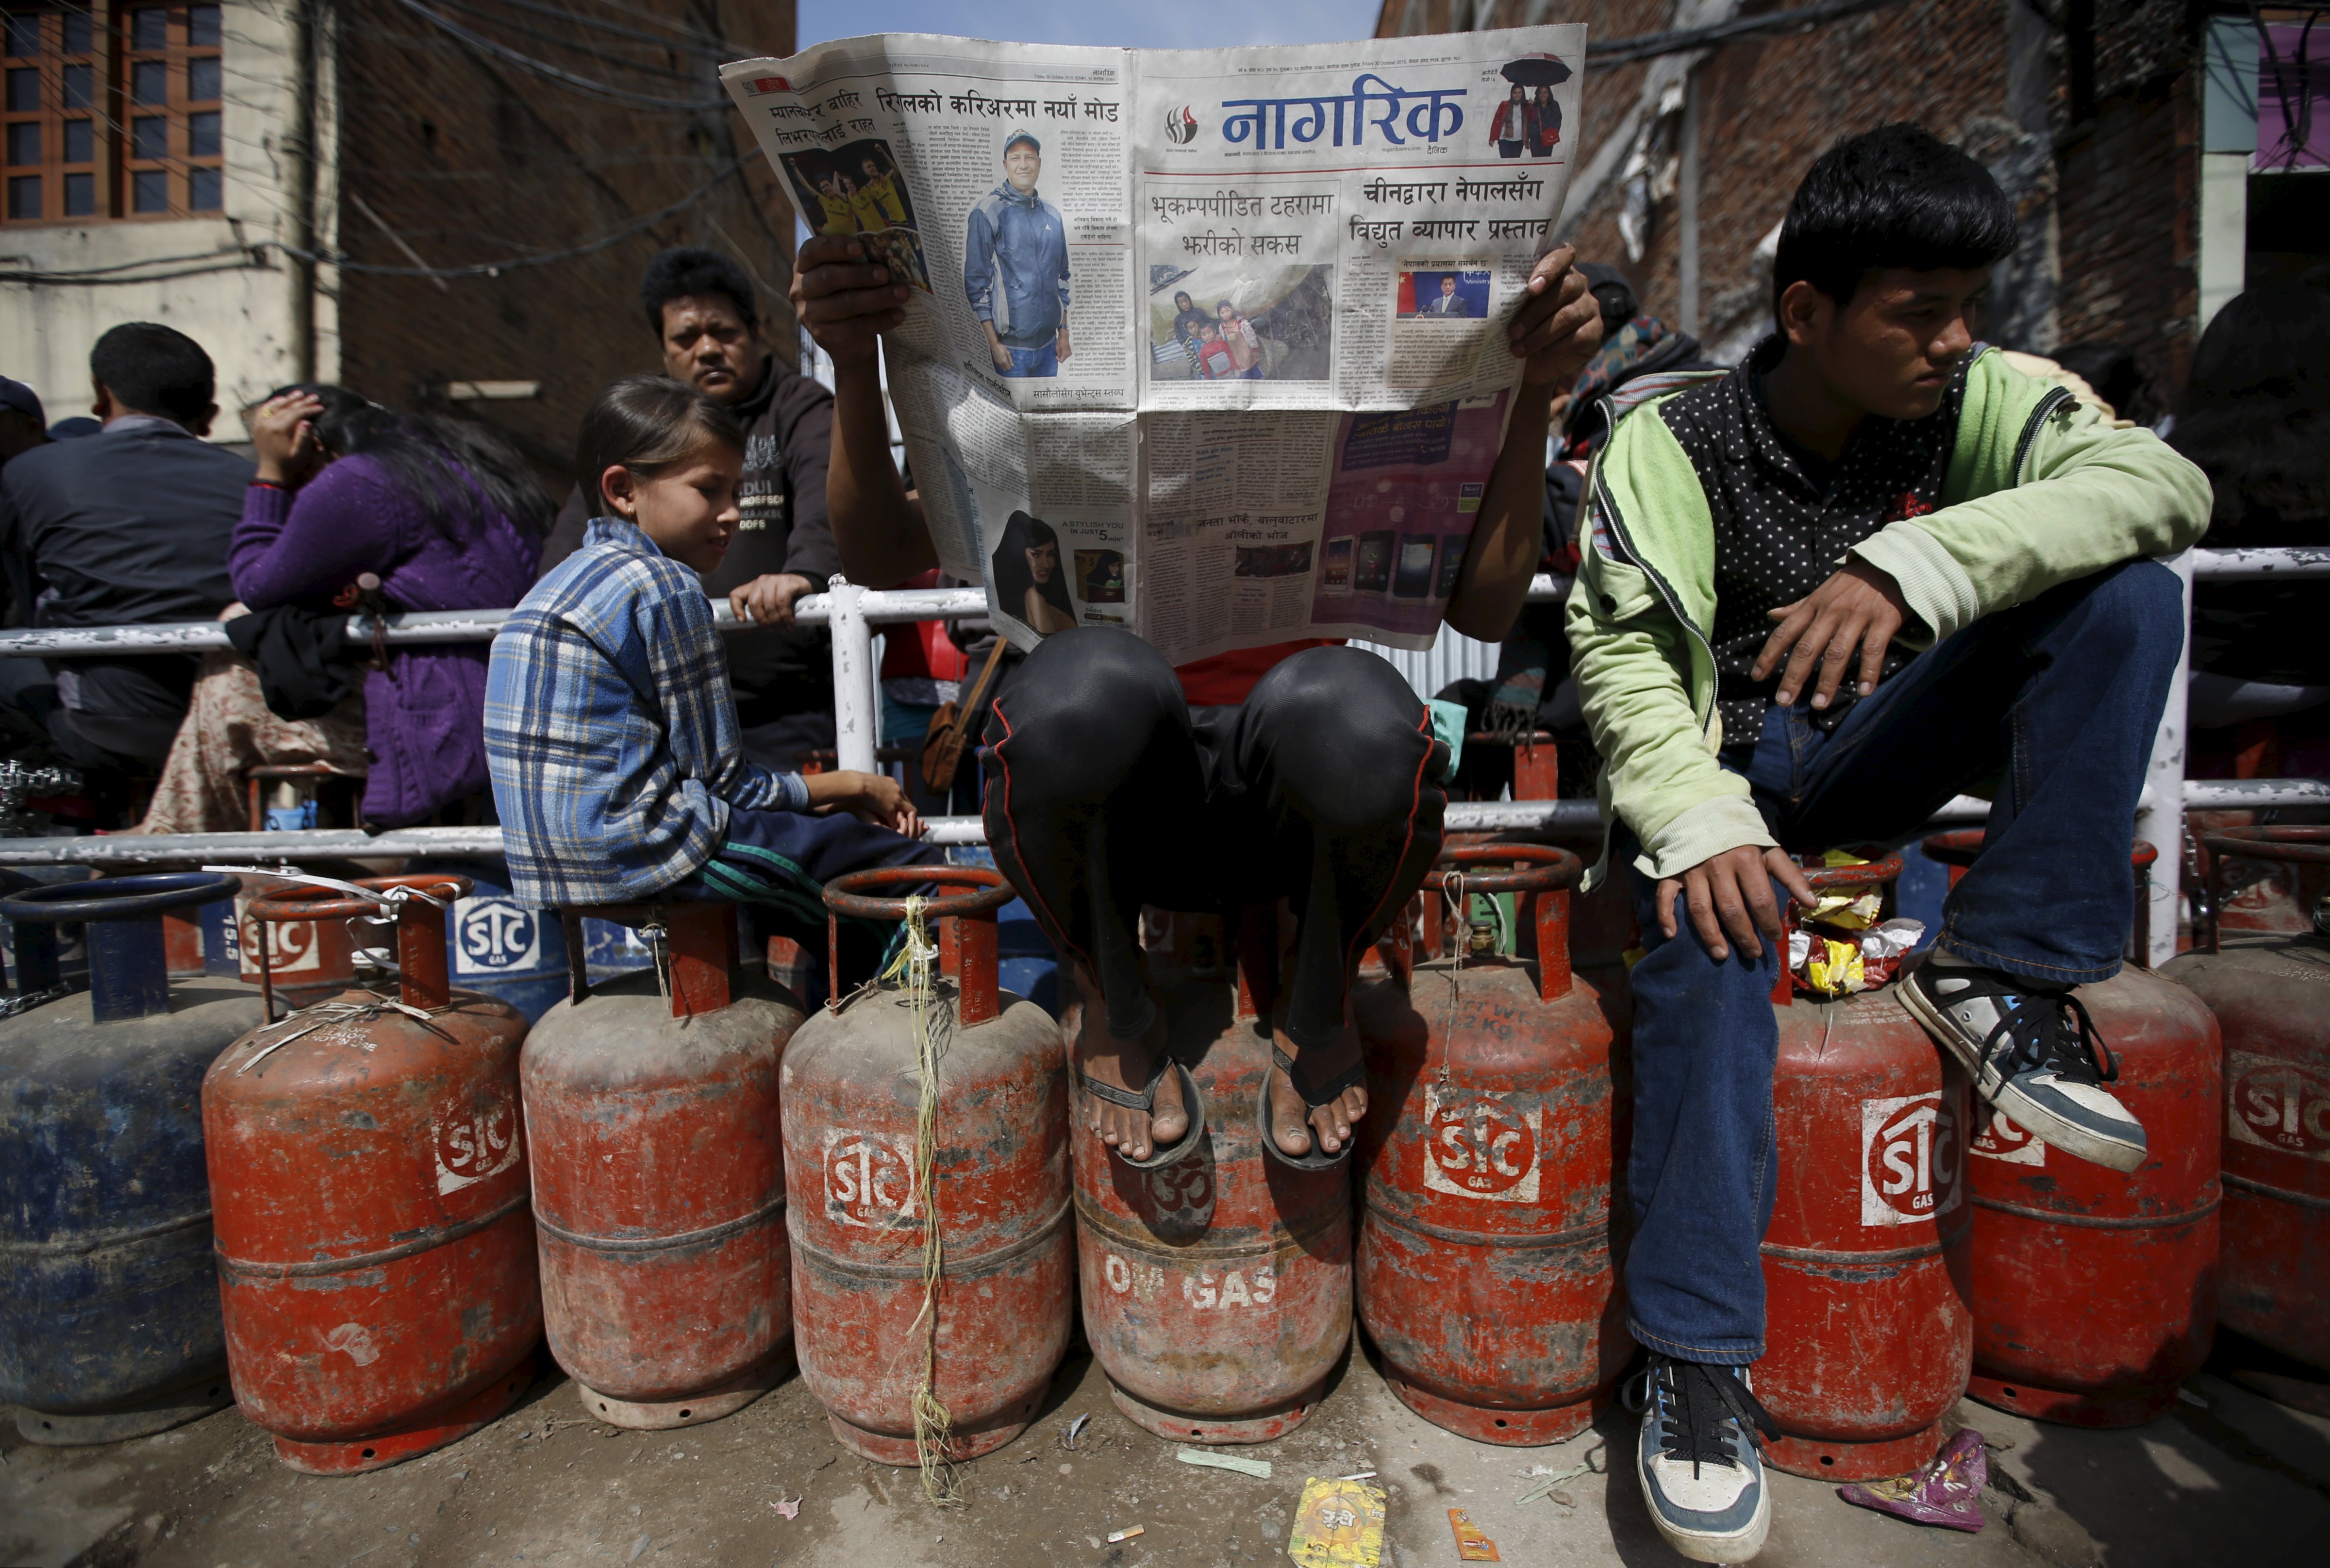 A man reads a newspaper as he sits on top of empty gas cylinder as he waits in a queue to buy cooking gas along with other customers during the ongoing fuel crises that has been continuing for over a month now in Kathmandu